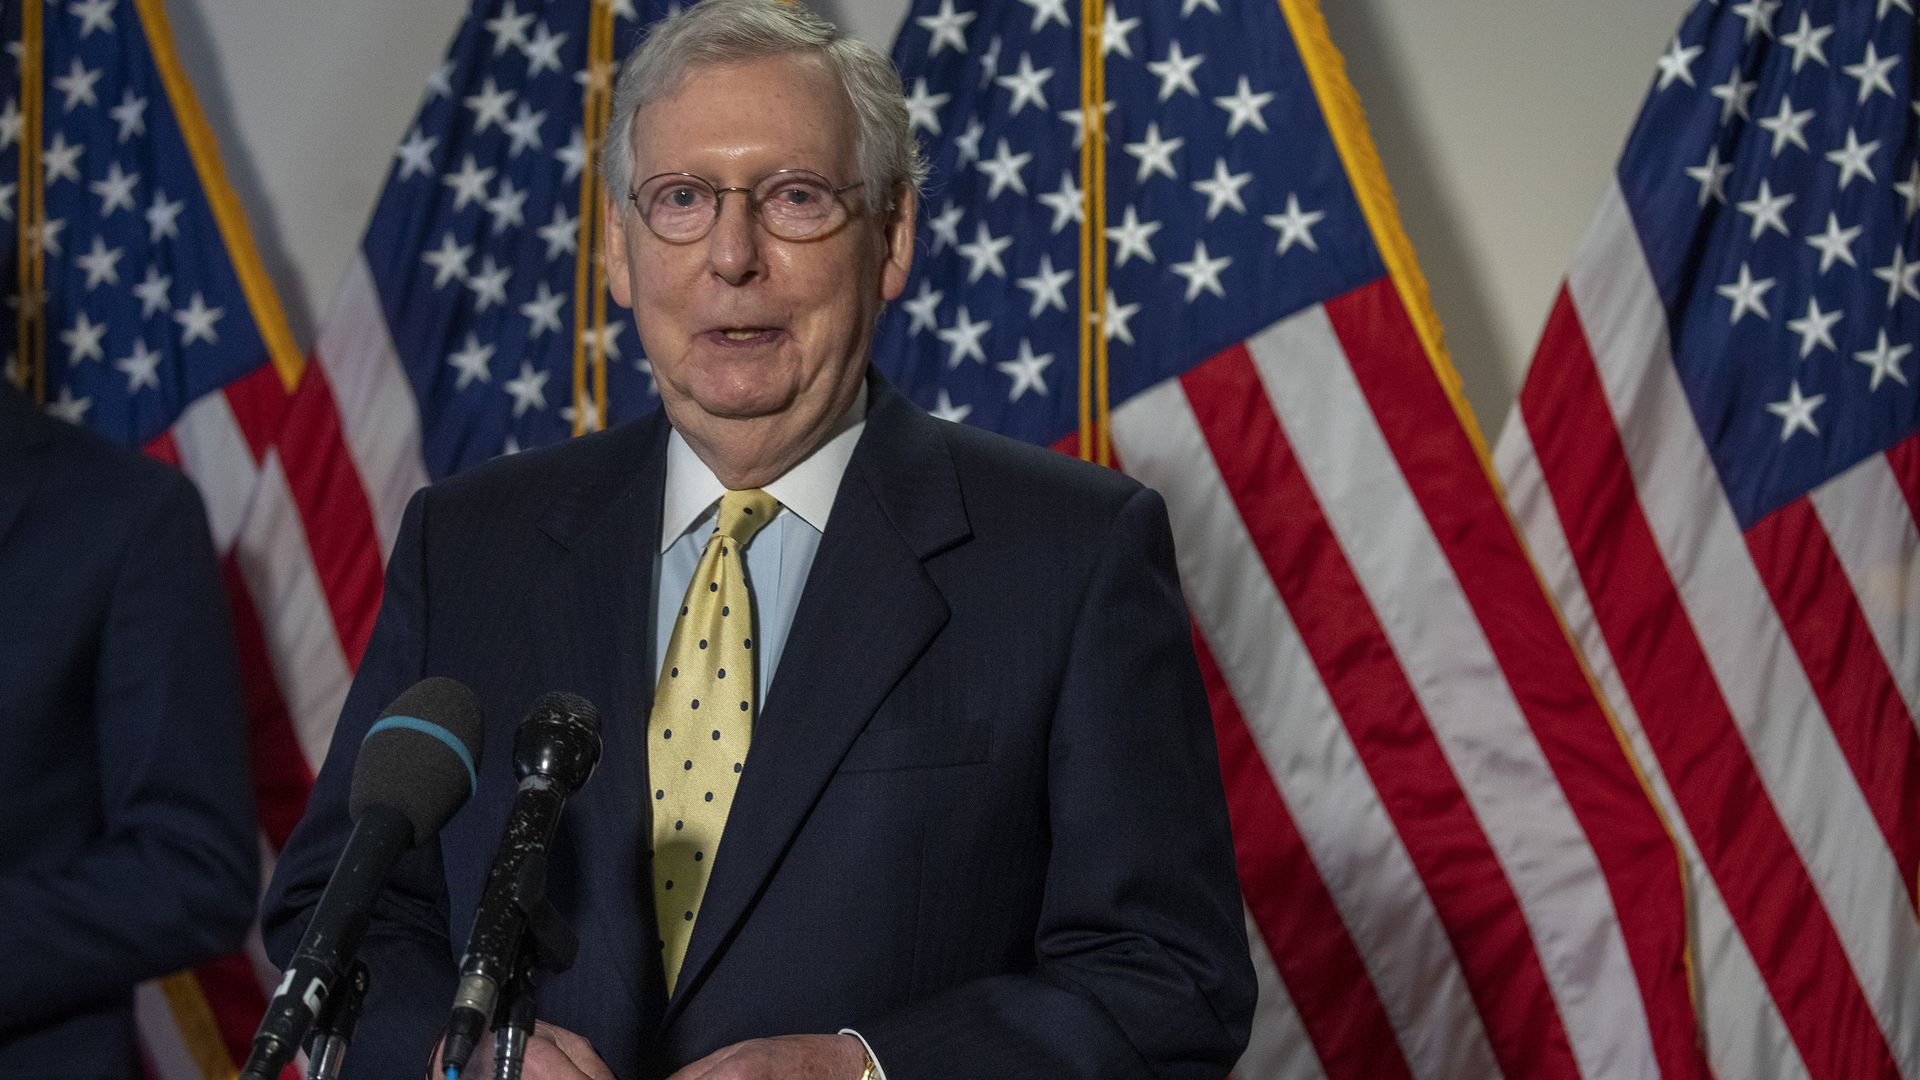 Mitch McConnell at a press conference